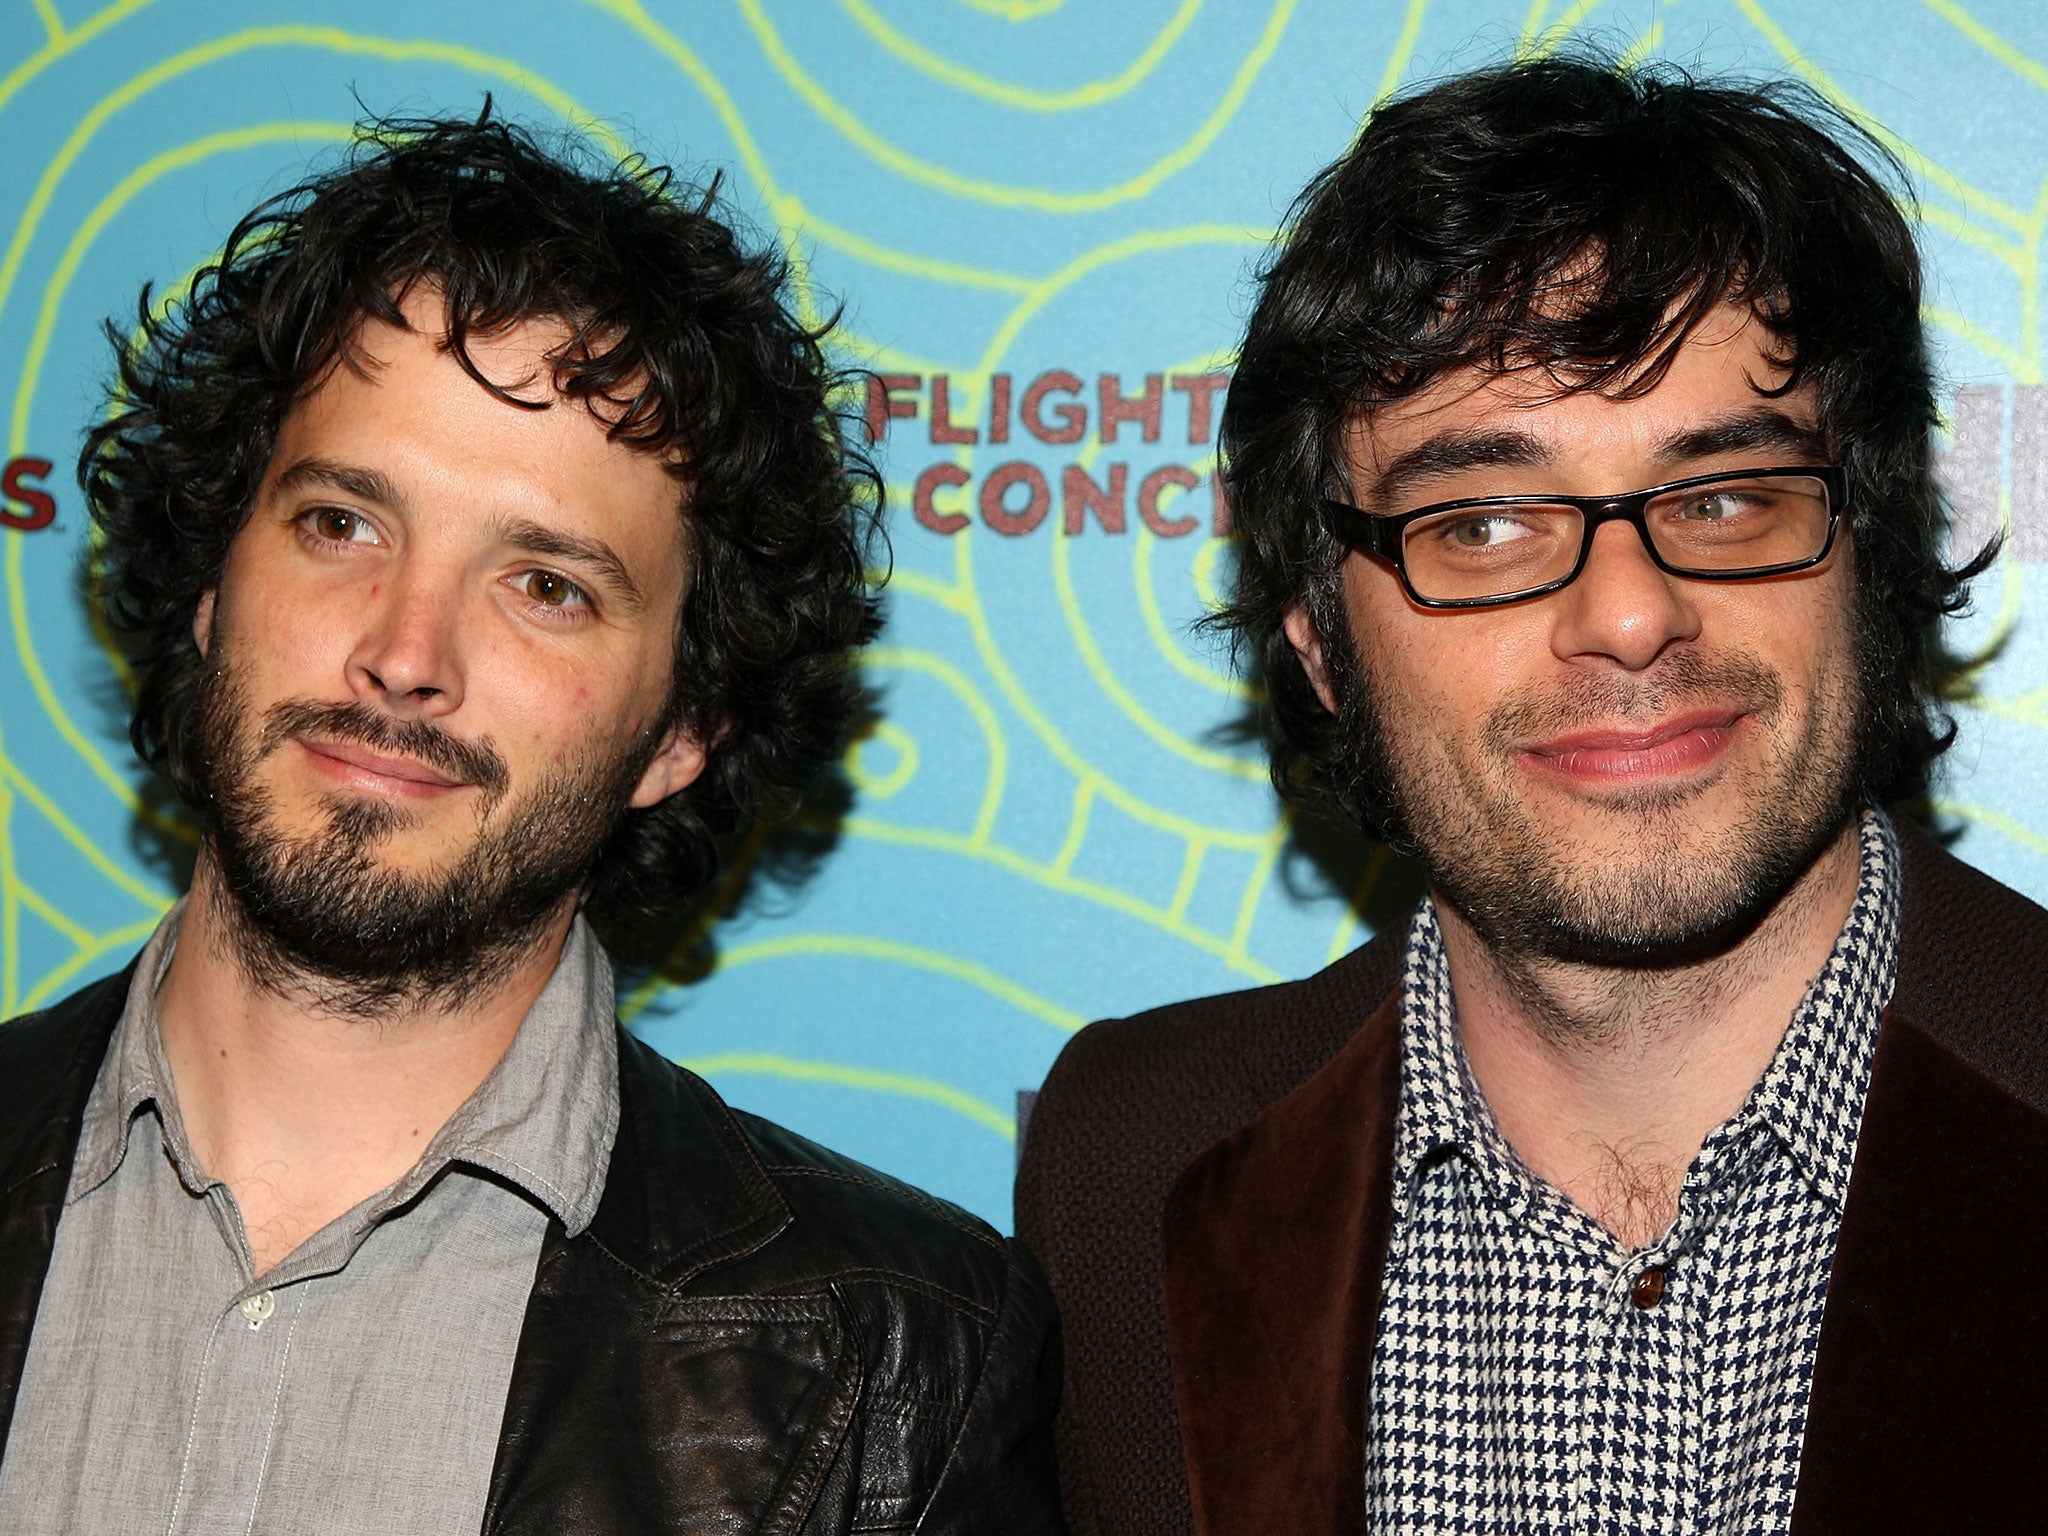 Bret McKenzie and Jermaine Clement of Flight of the Conchords